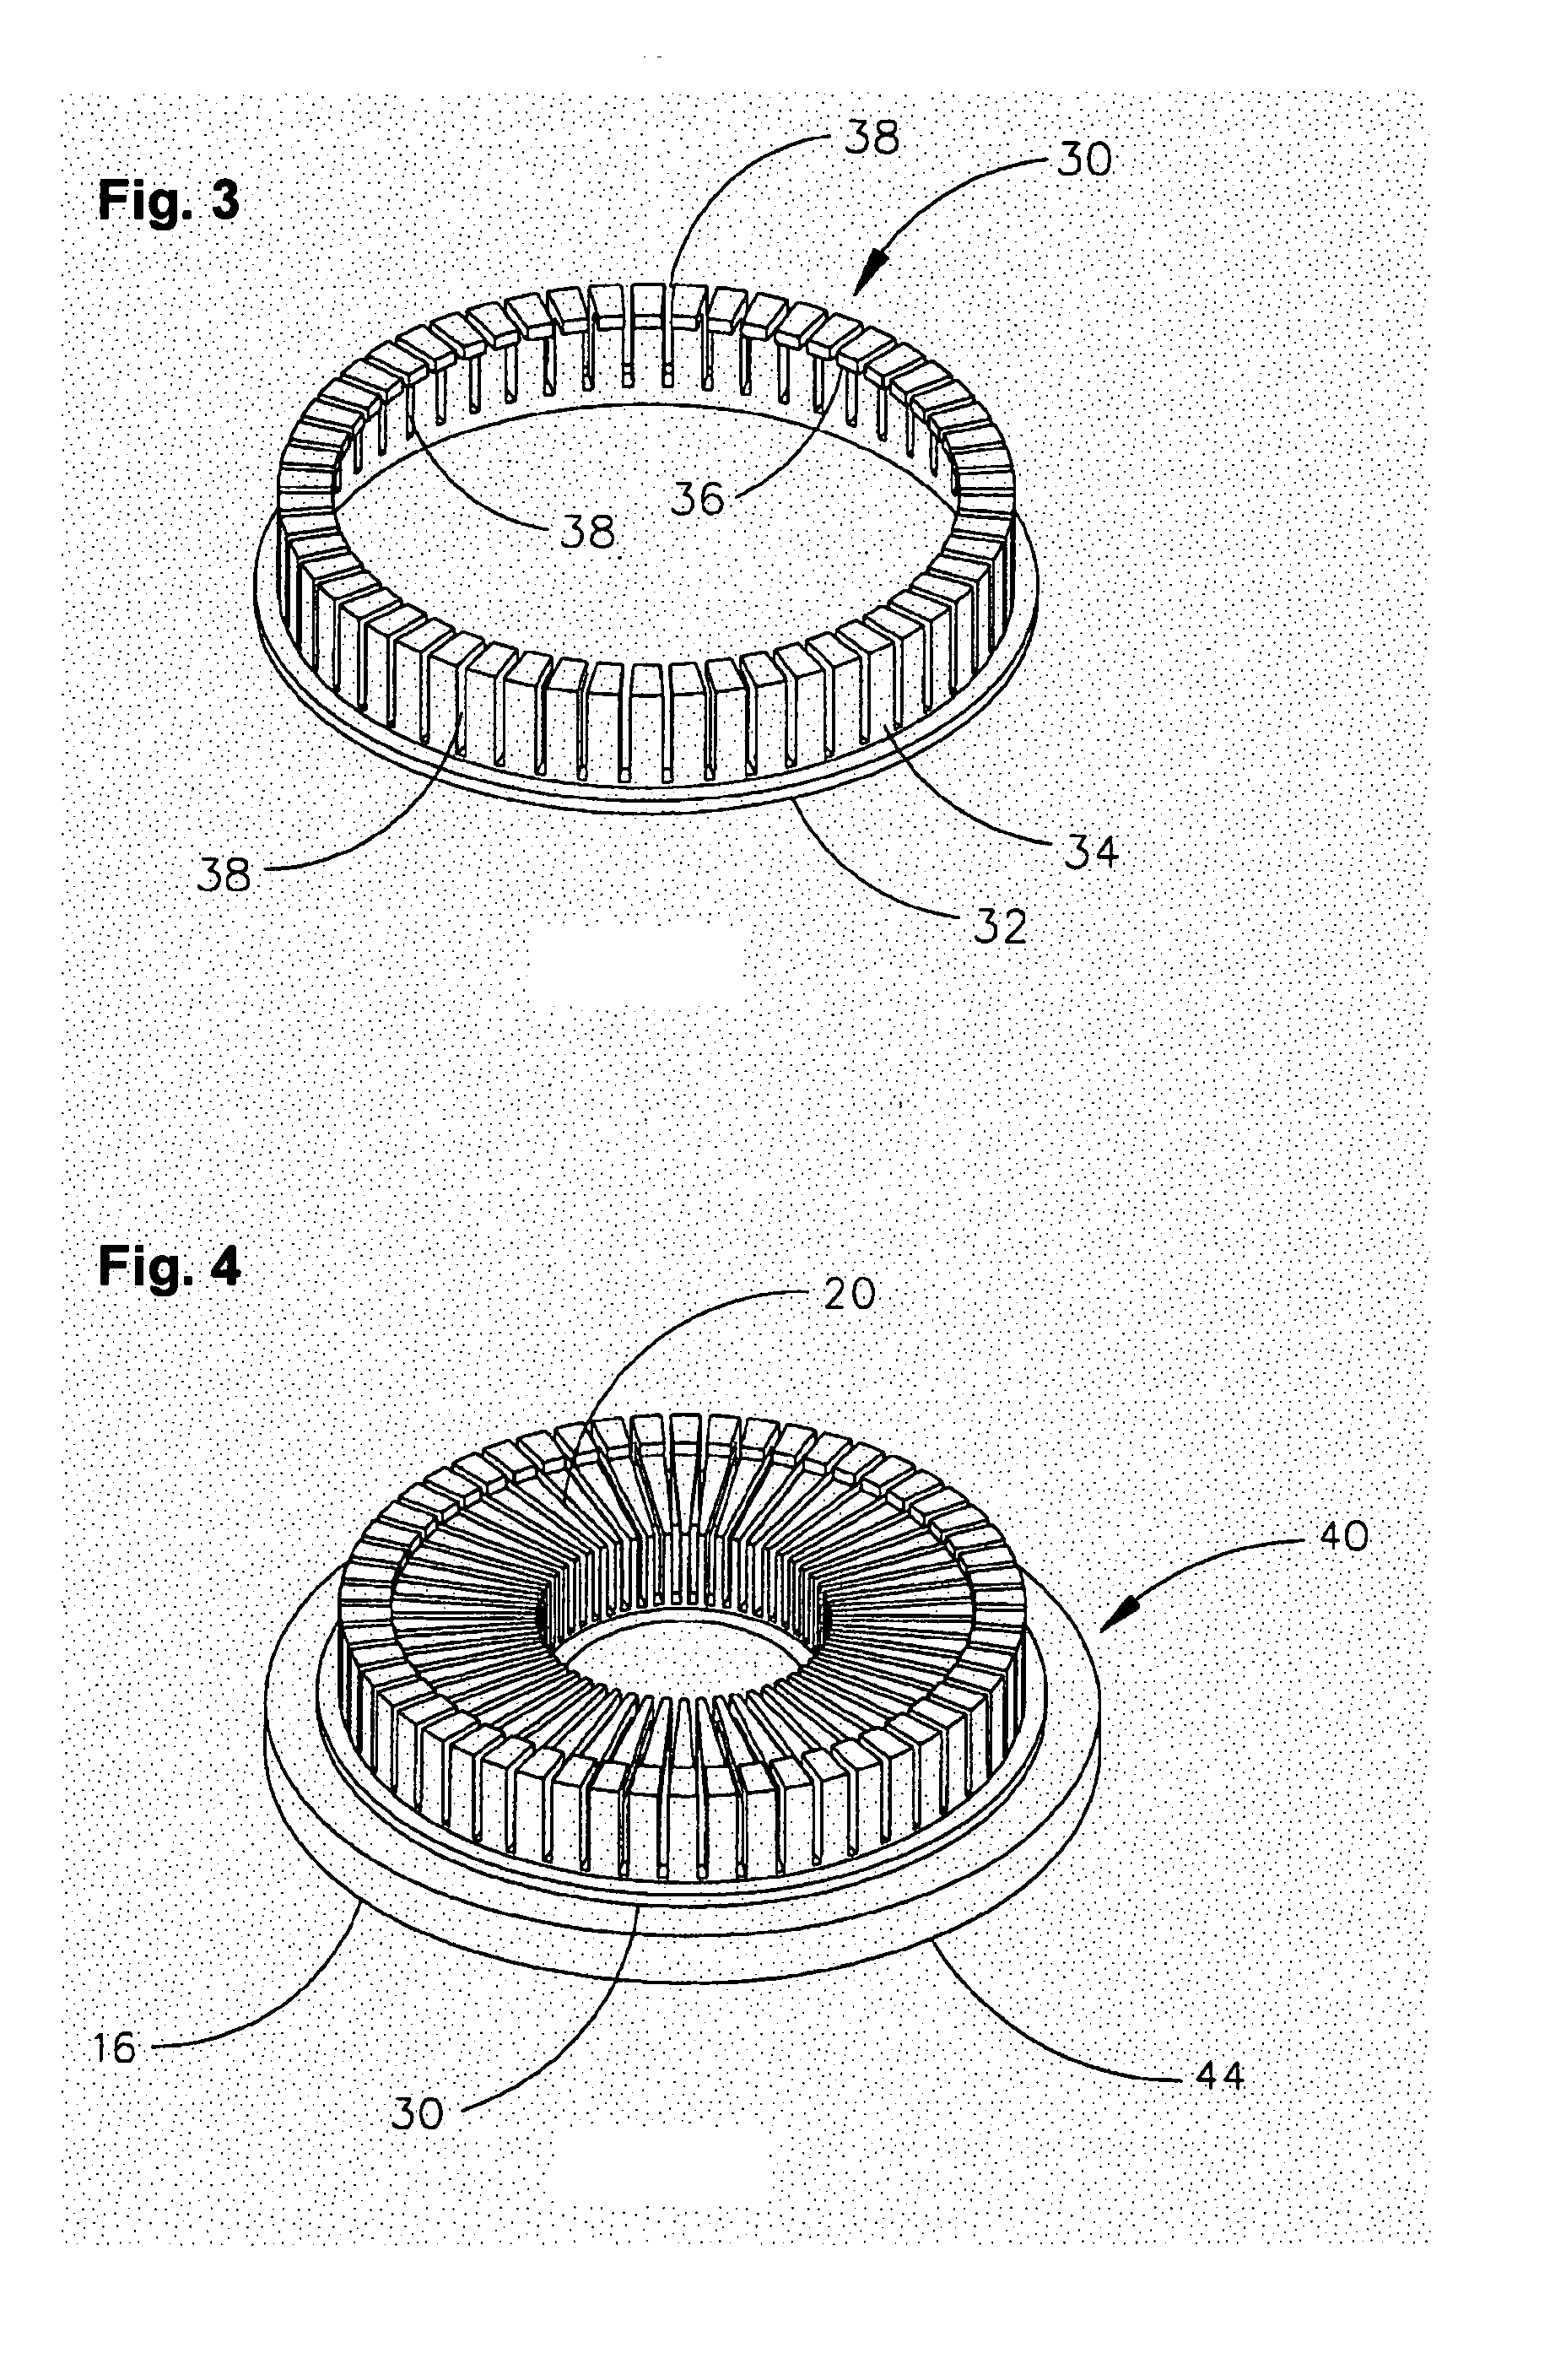 Soft magnetic amorphous electromagnetic component and method for making the same